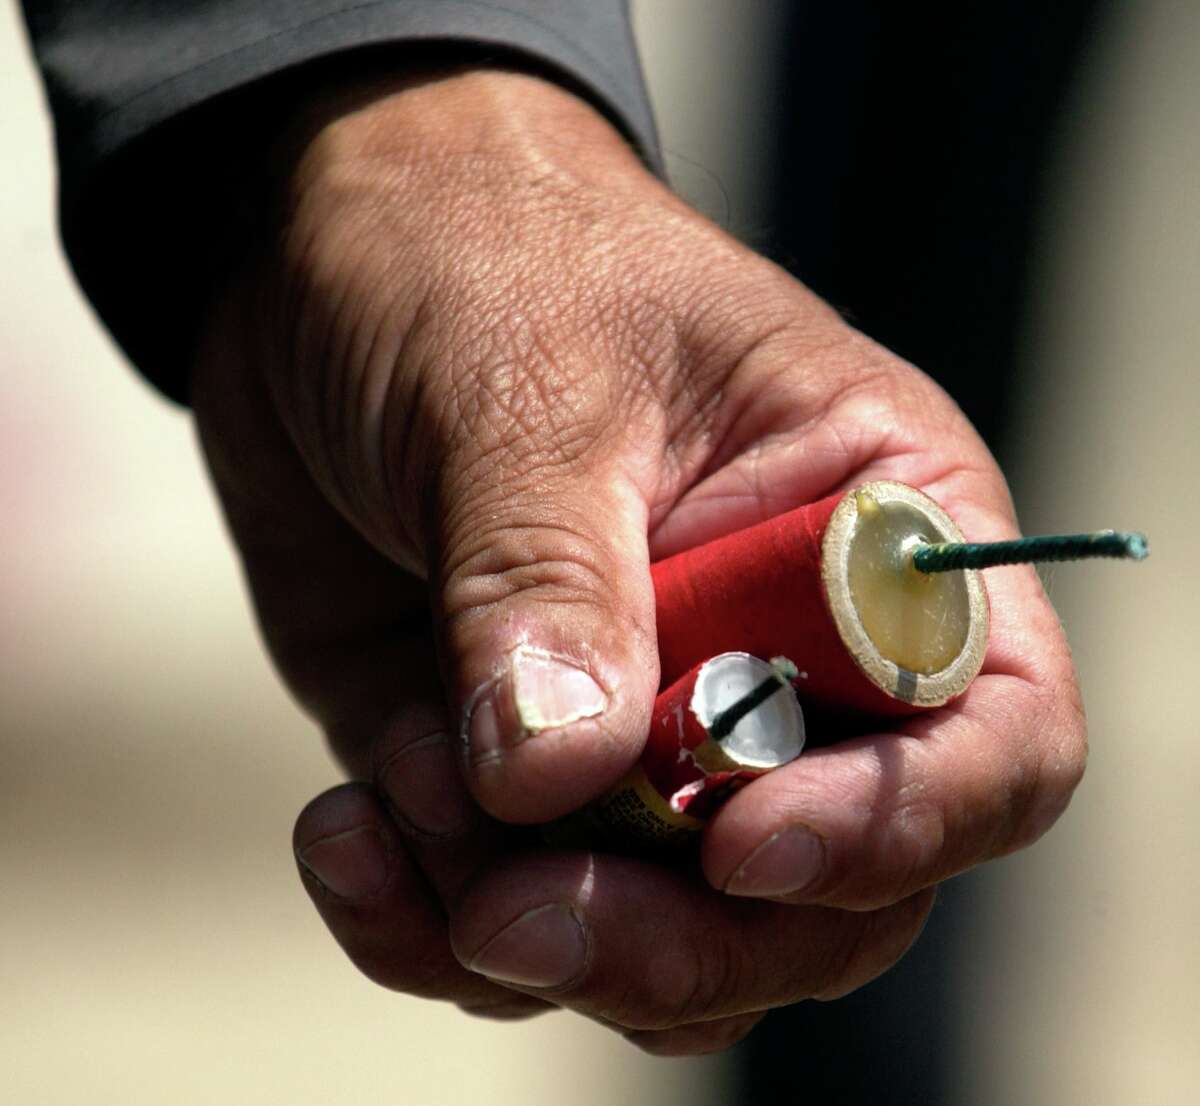 Connecticut State Police detective Jose Colon holds firecrackers of a type that is illegal in Connecticut at a news conference in Middletown, Conn., Tuesday, June 29, 2004.